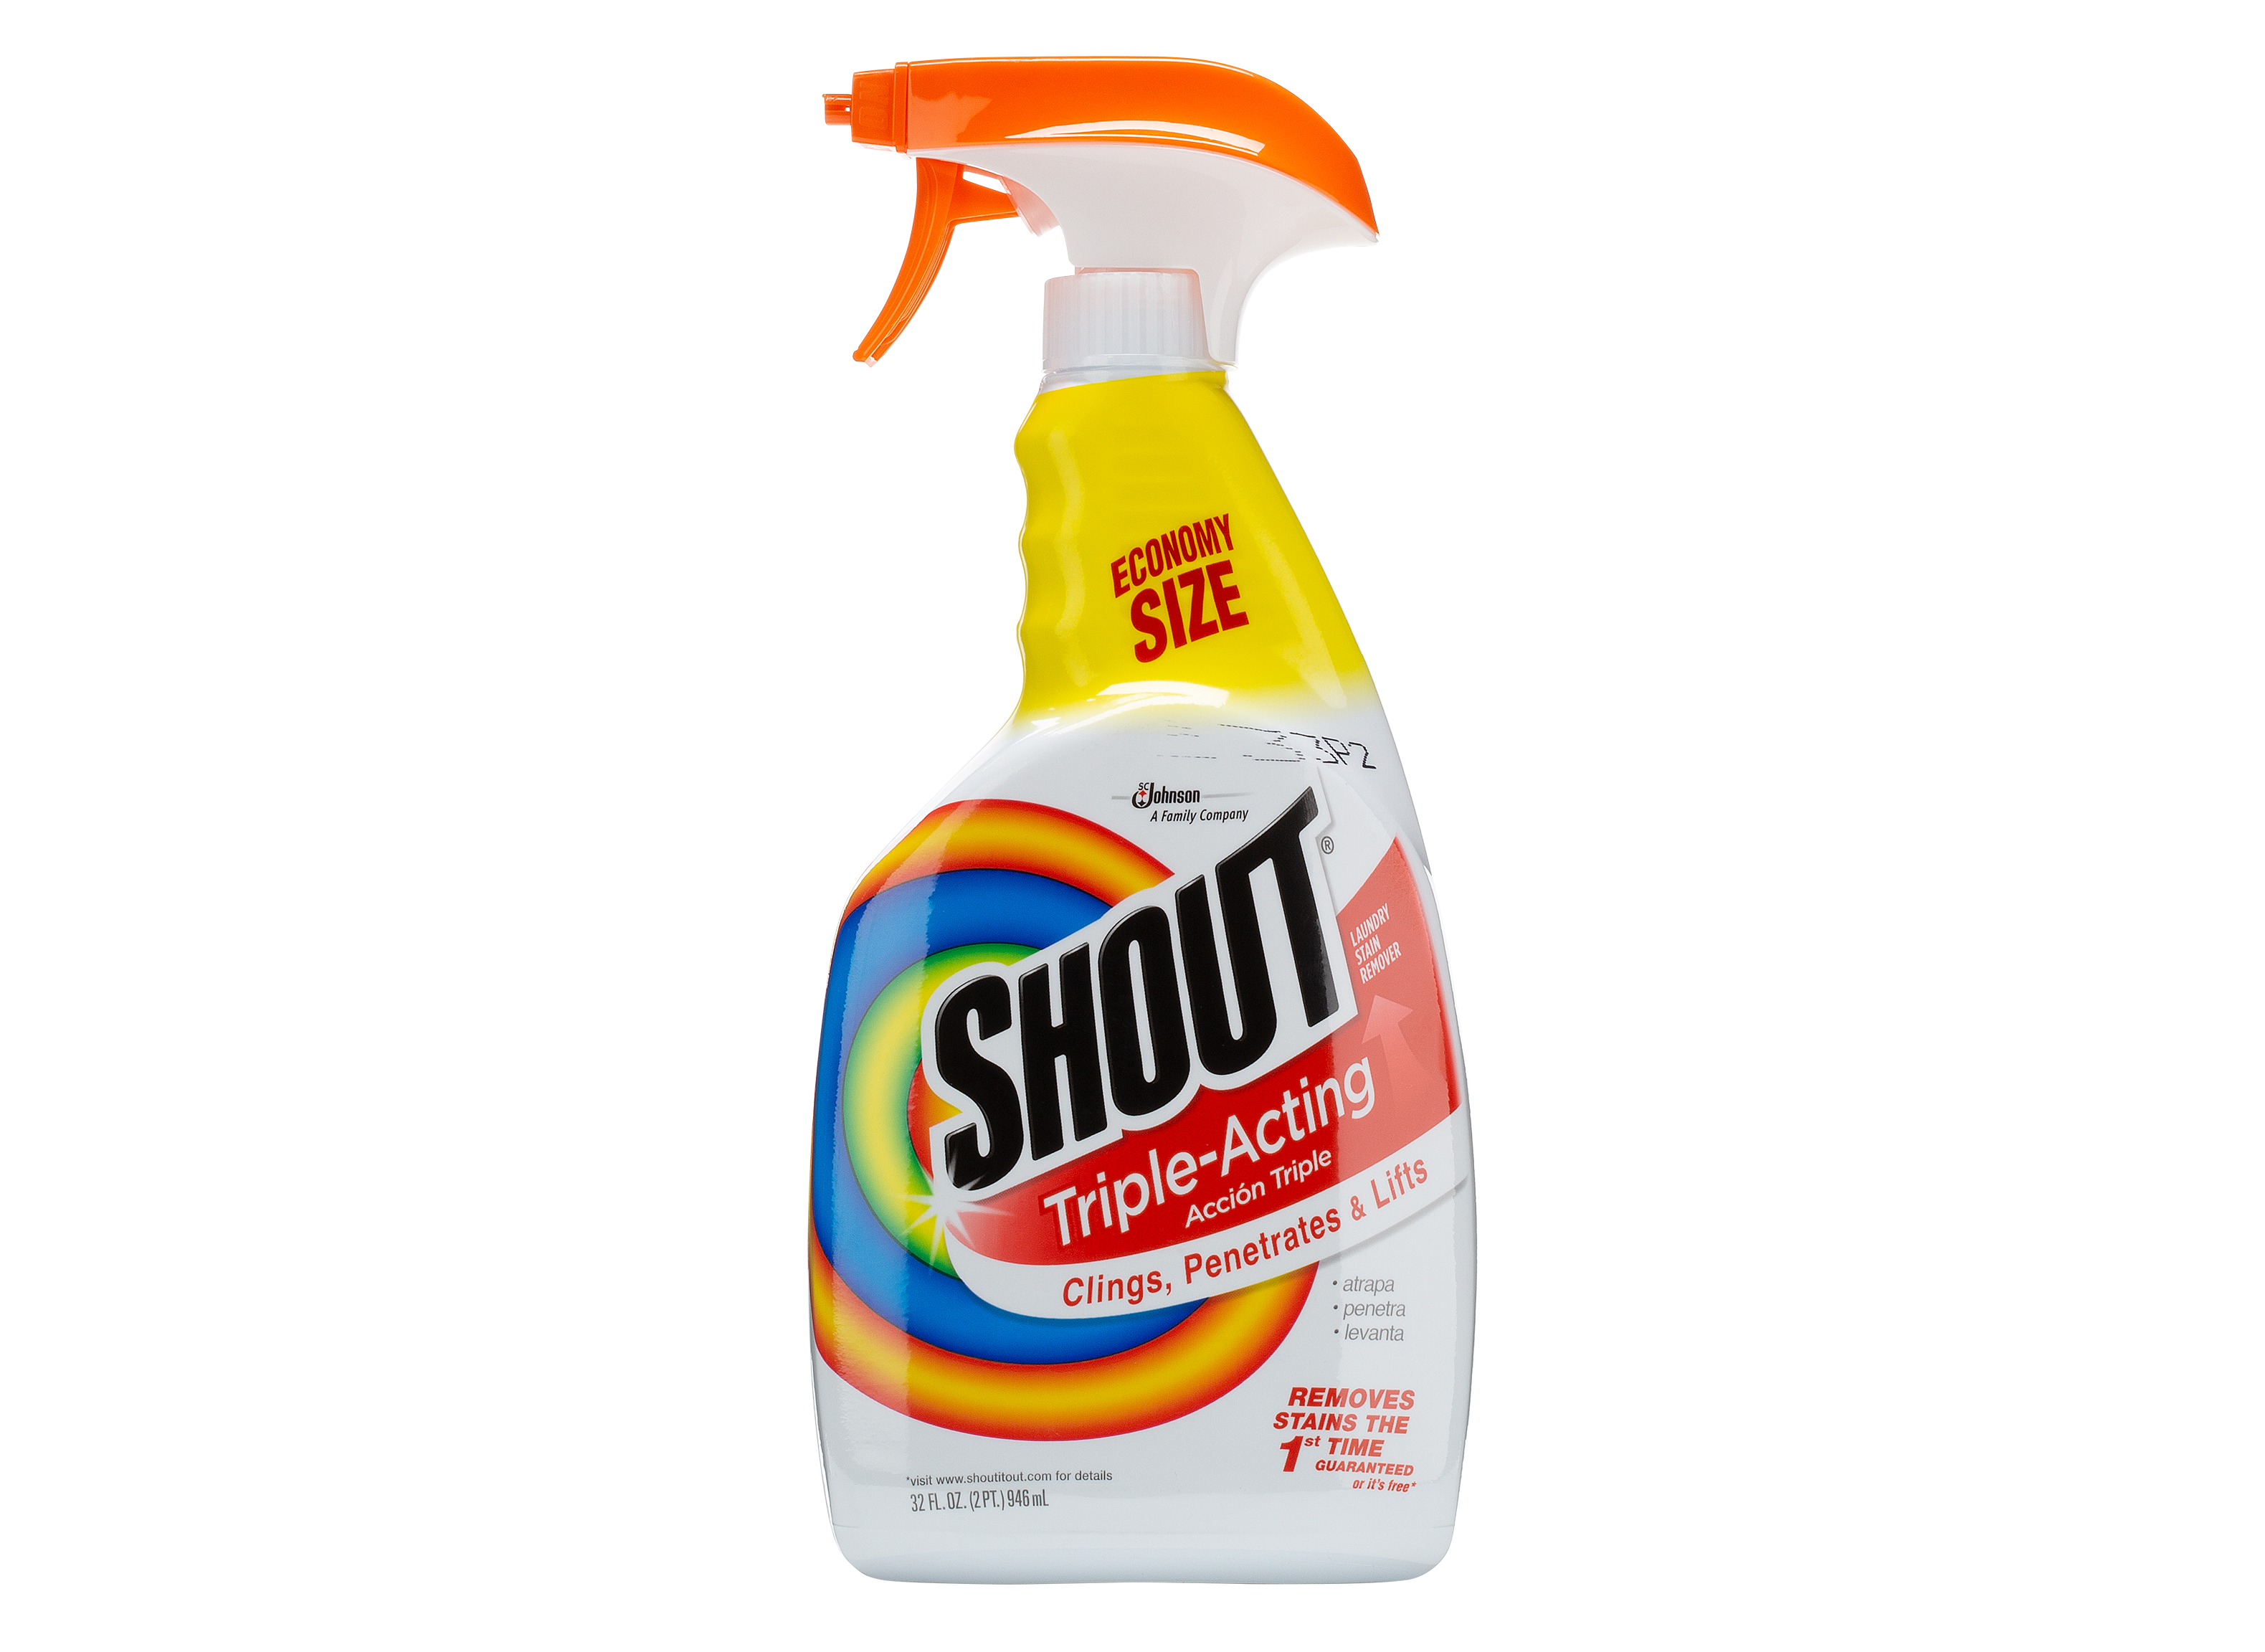 Shout Triple-Acting Laundry Stain Remover Spray Bottle for Everyday Stains,  30 fl oz Value Pack